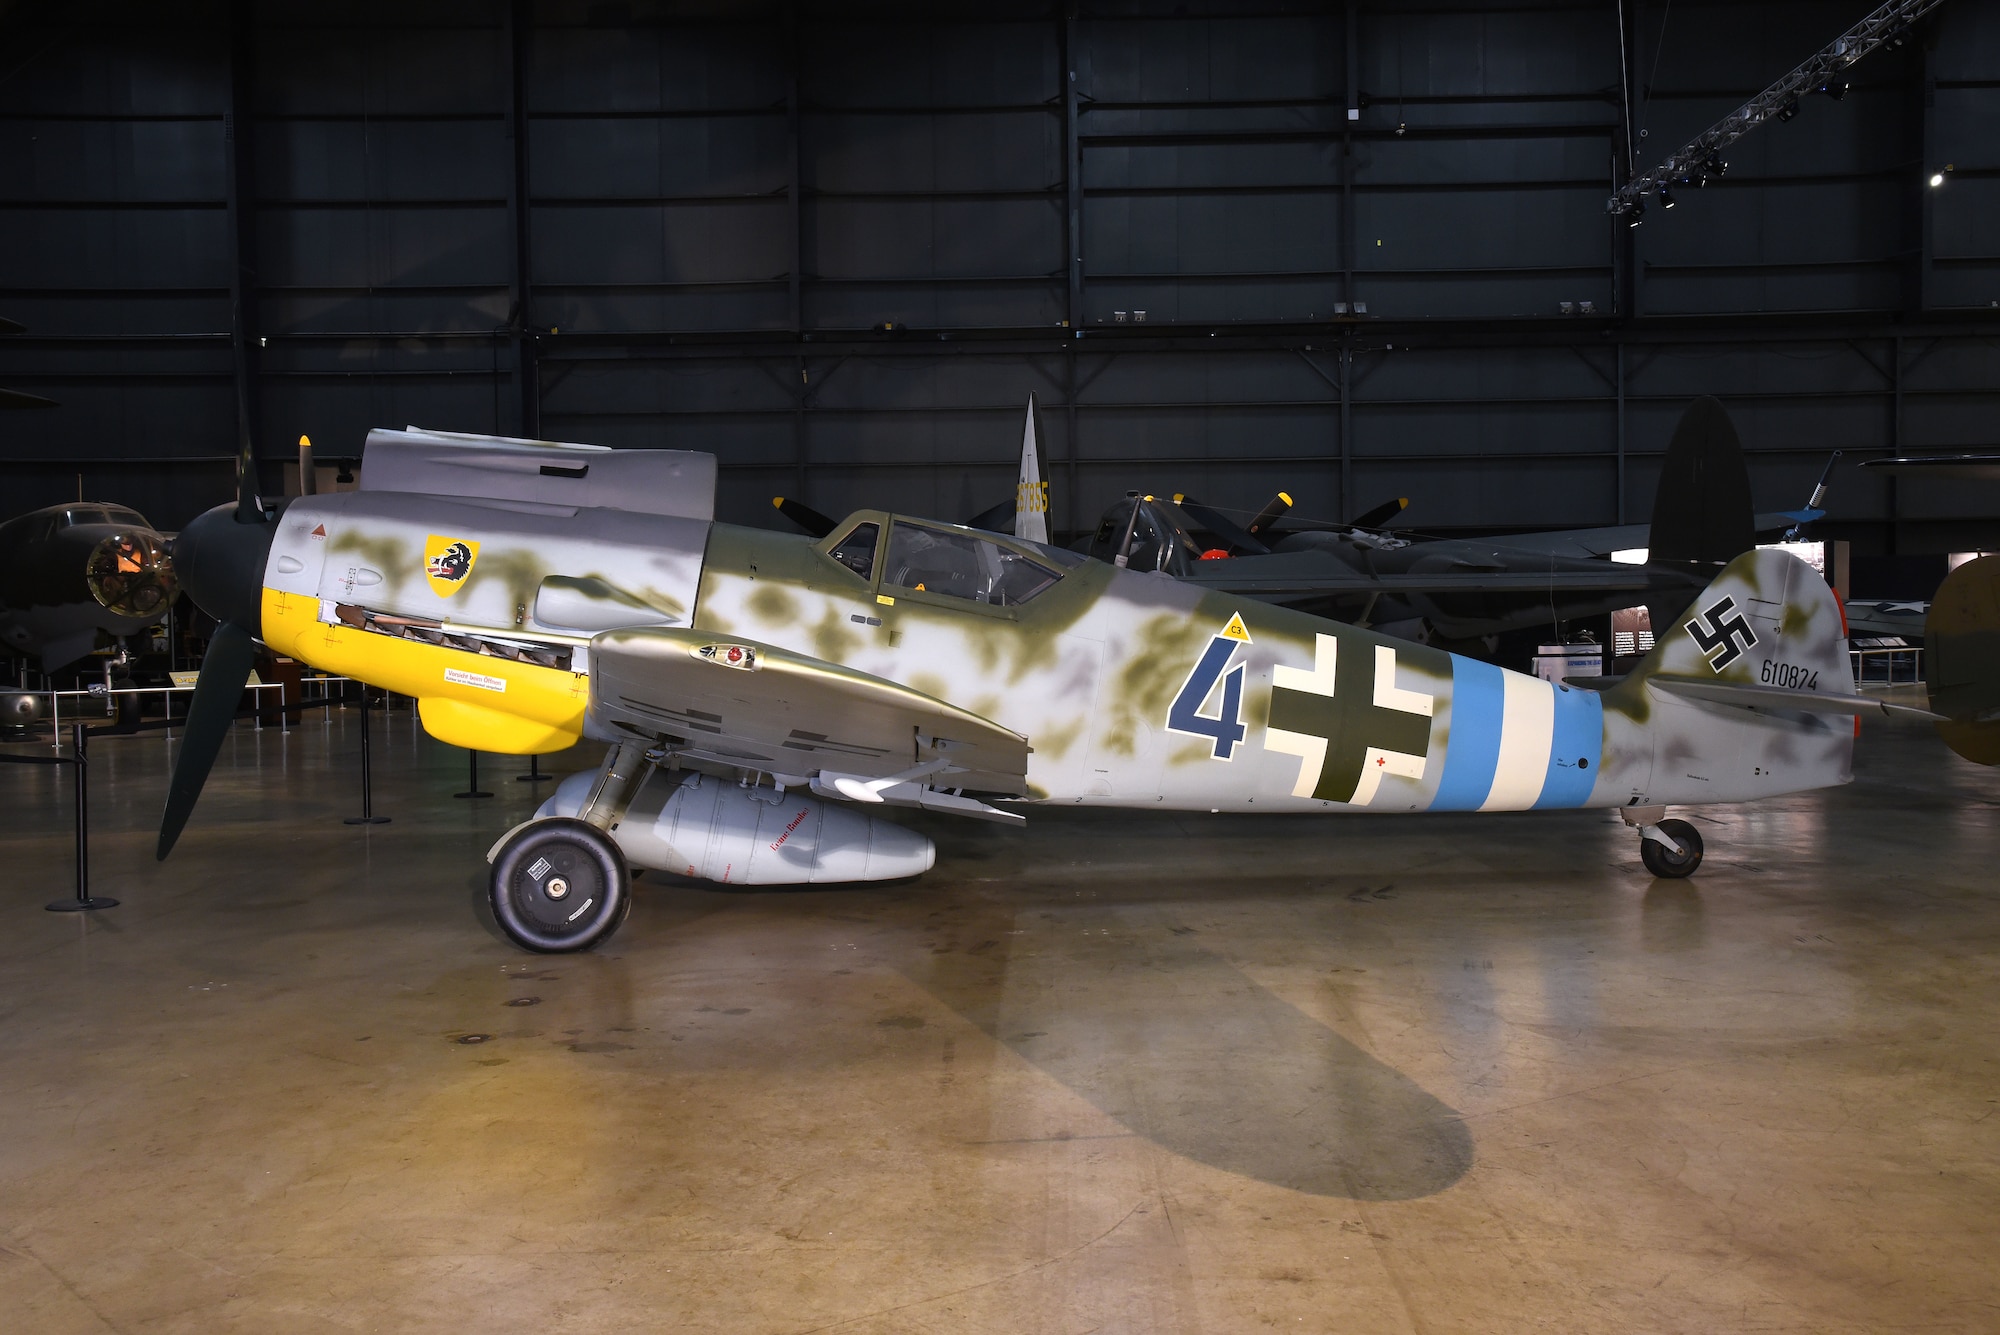 DAYTON, Ohio -- Messerschmitt Bf 109G-10 at the National Museum of the United States Air Force. The museum's Bf 109G-10 is painted to represent an aircraft from Jagdgeschwader 300, a unit that defended Germany against Allied bombers during WWII. (U.S. Air Force photo by Ken LaRock)